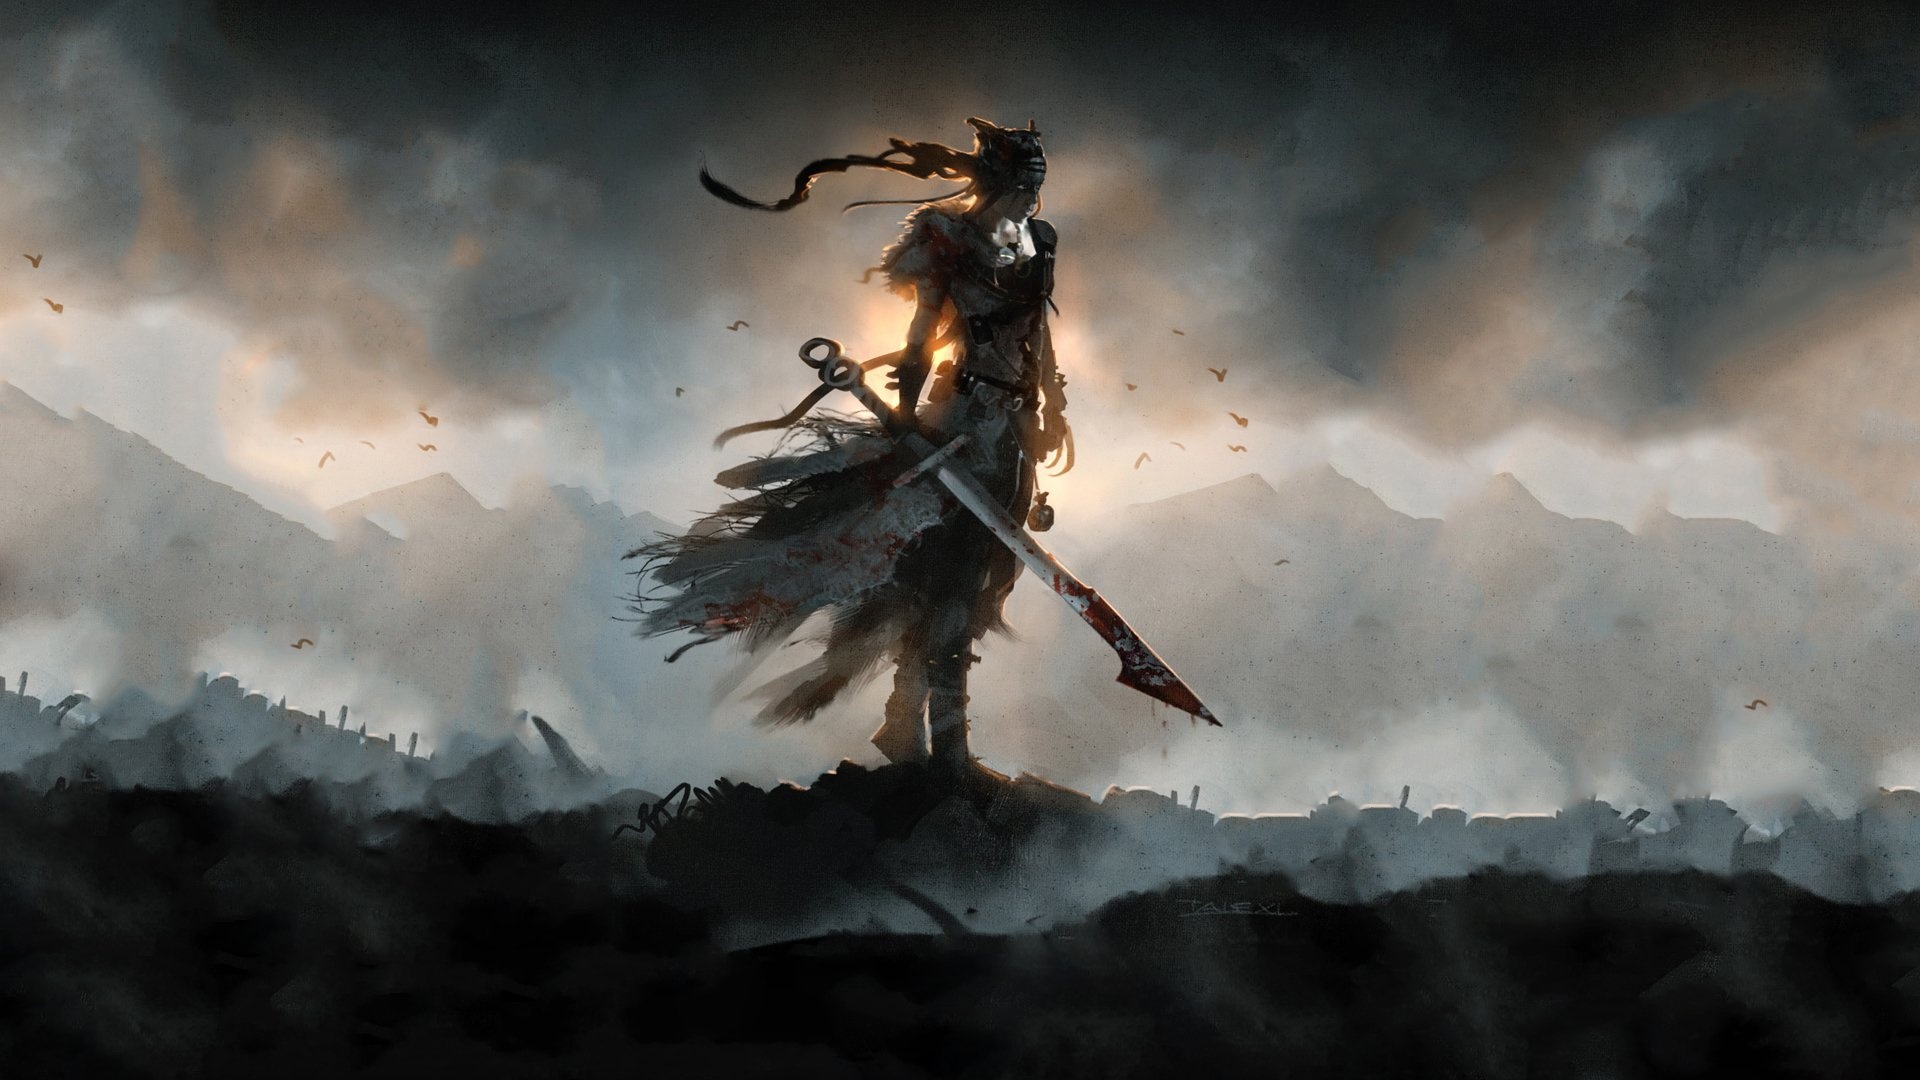 Hellblade Senua's Sacrifice, HD wallpapers background, Dark and brooding, Mysterious atmosphere, 1920x1080 Full HD Desktop